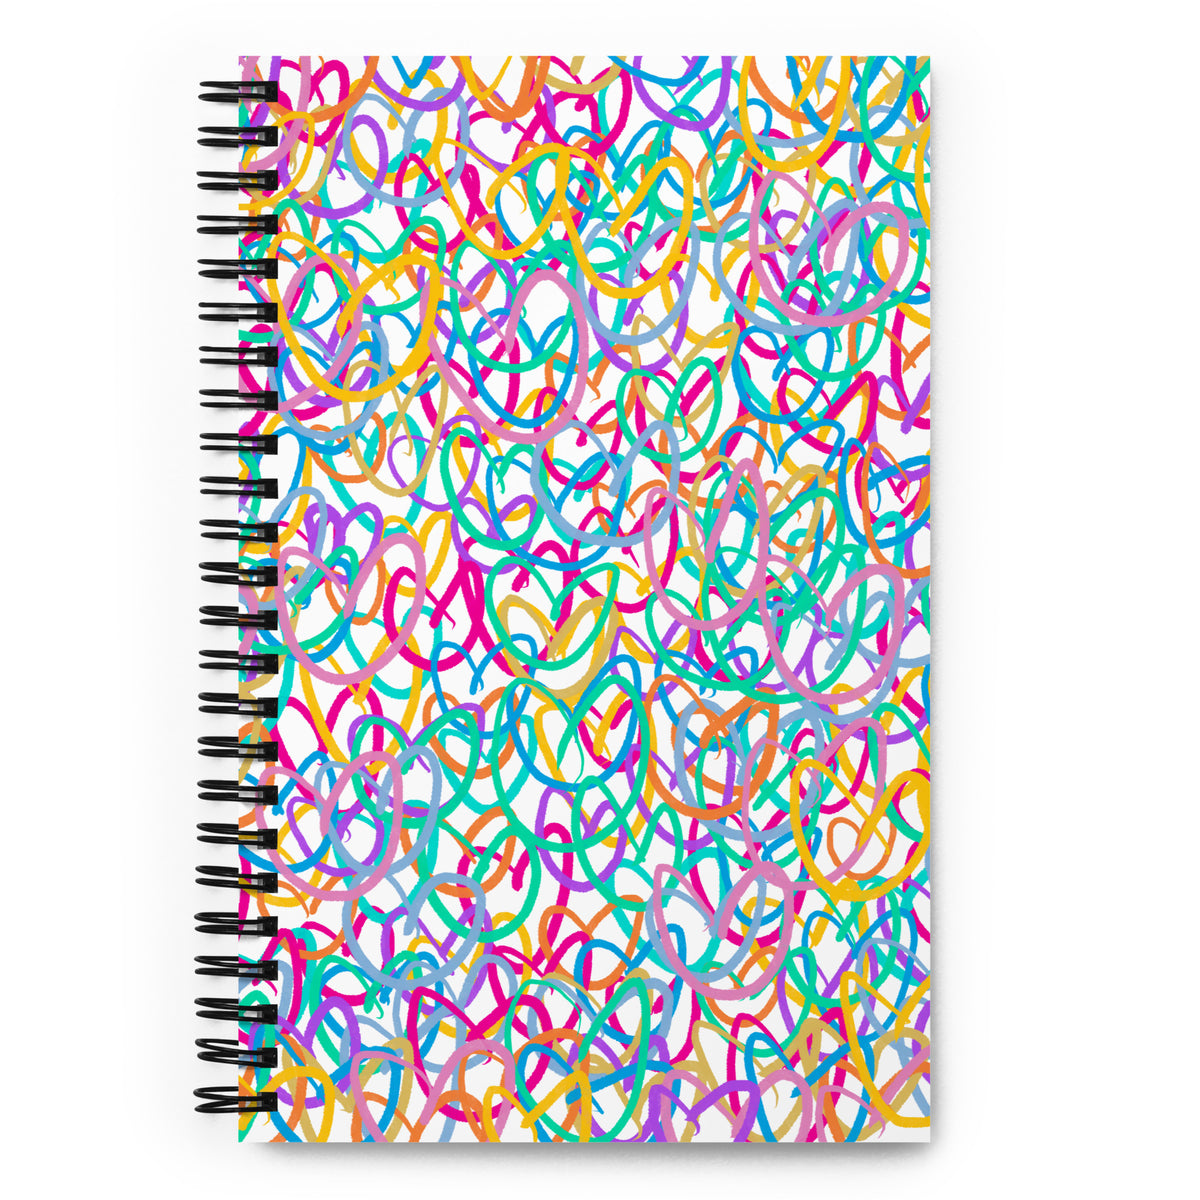 Squiggle Hearts Spiral notebook